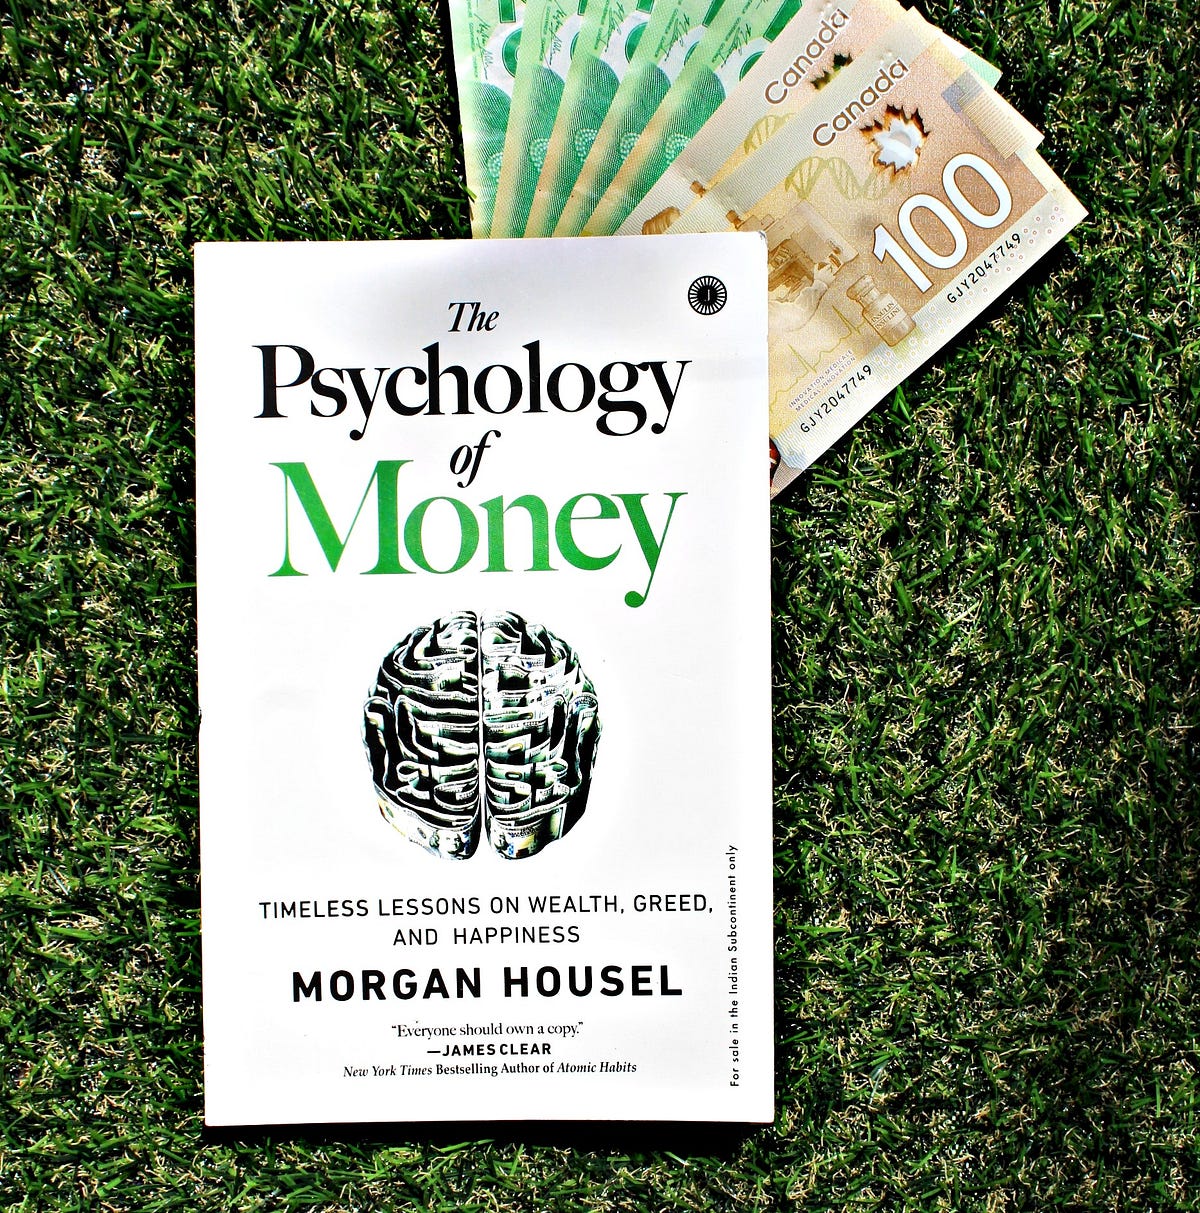 5 Valuable Lessons From The Psychology of Money